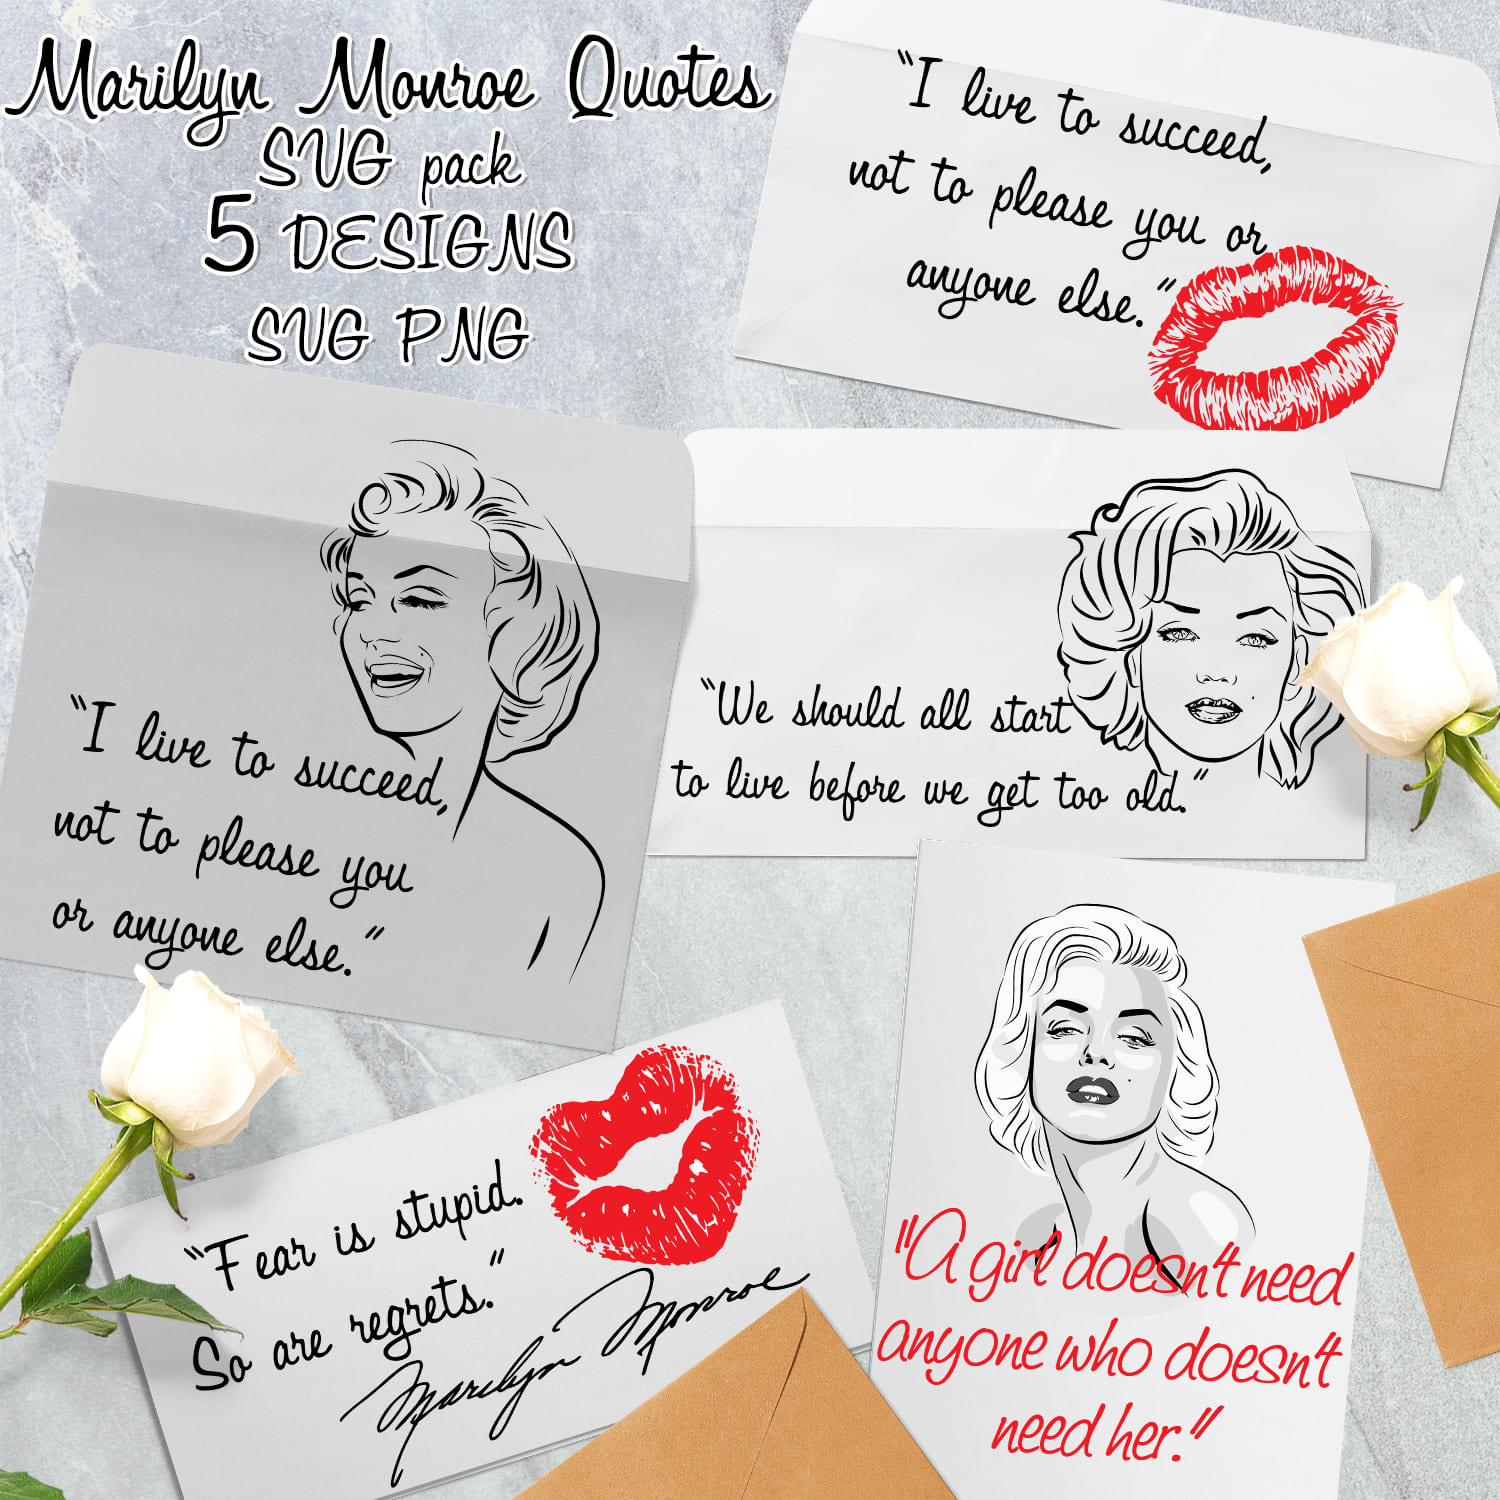 Images with marilyn monroe quotes svg cover.